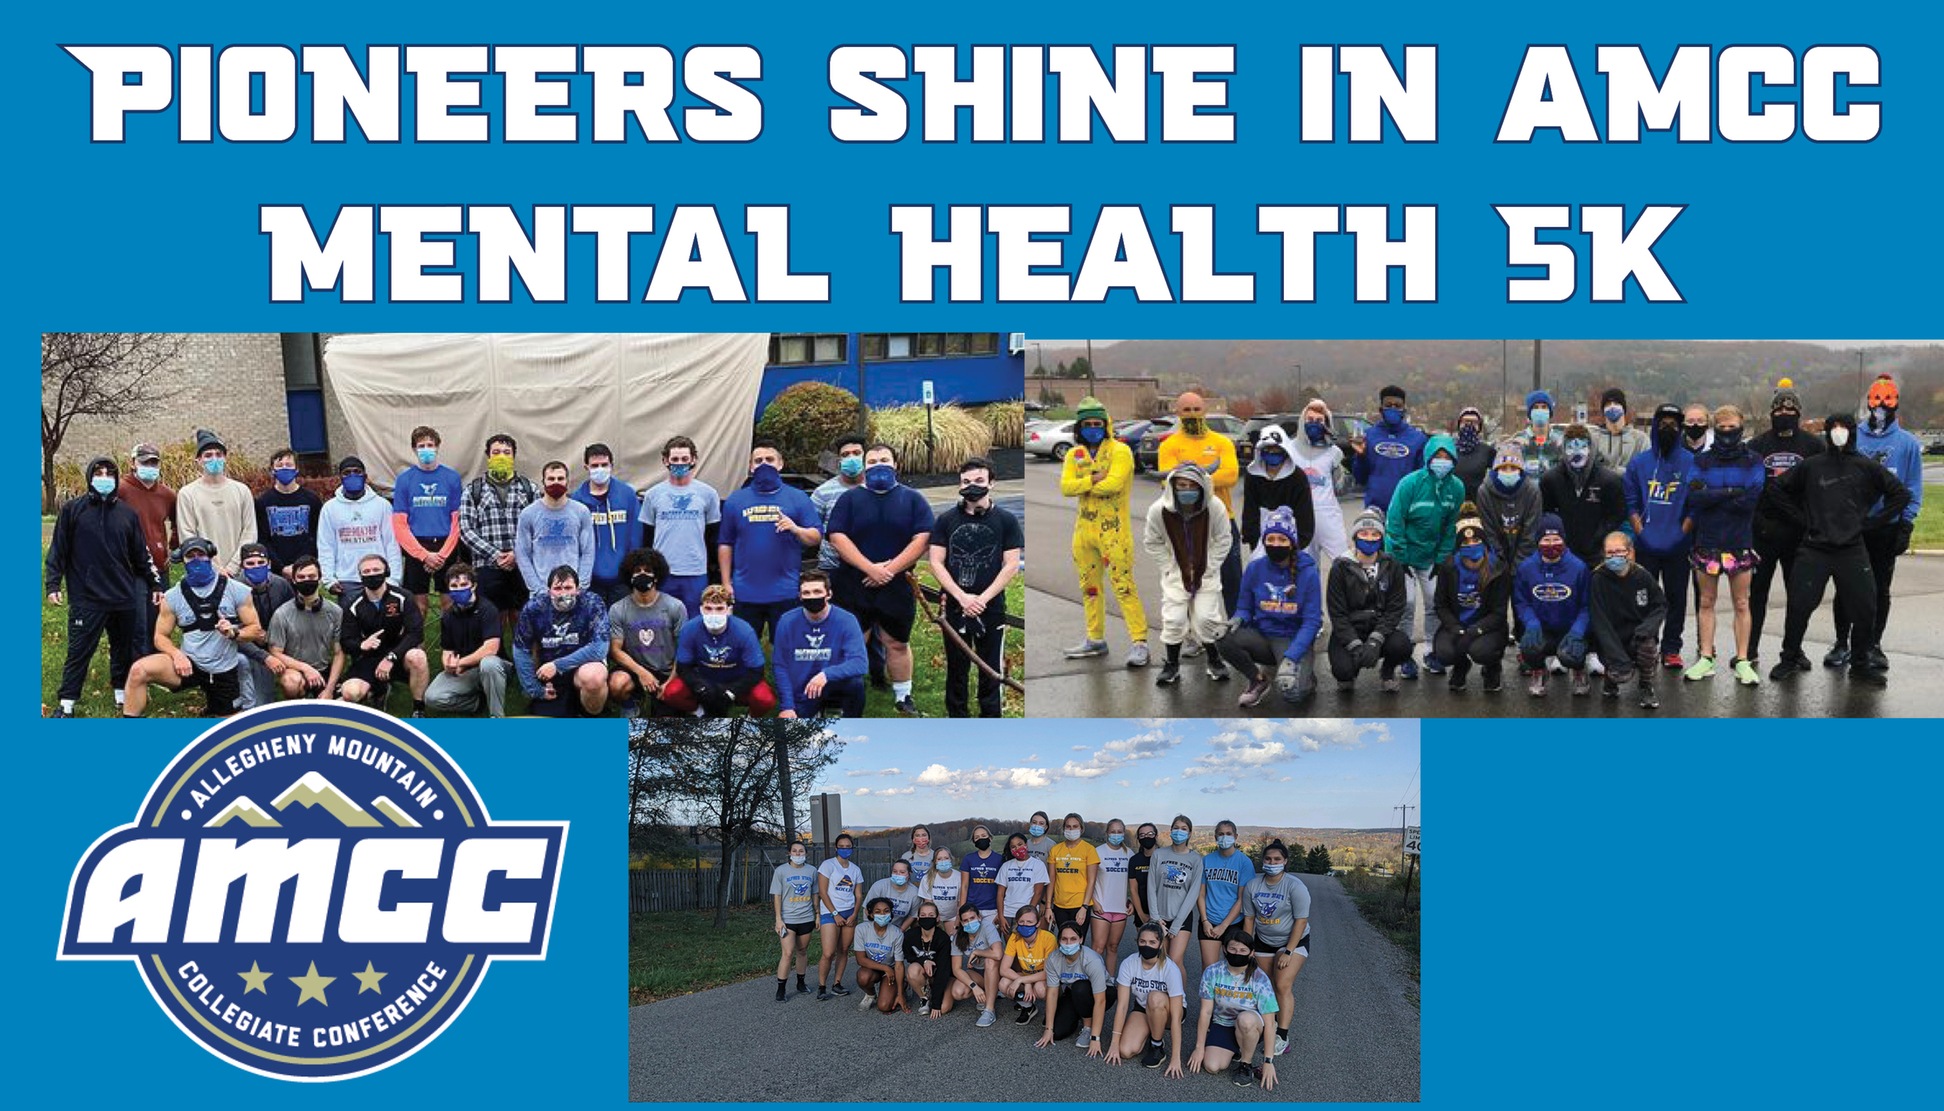 Alfred State student-athletes participate in the AMCC Mental Health 5k - pictured are the wrestling team, the track & field/cross country team, and the women's soccer team.